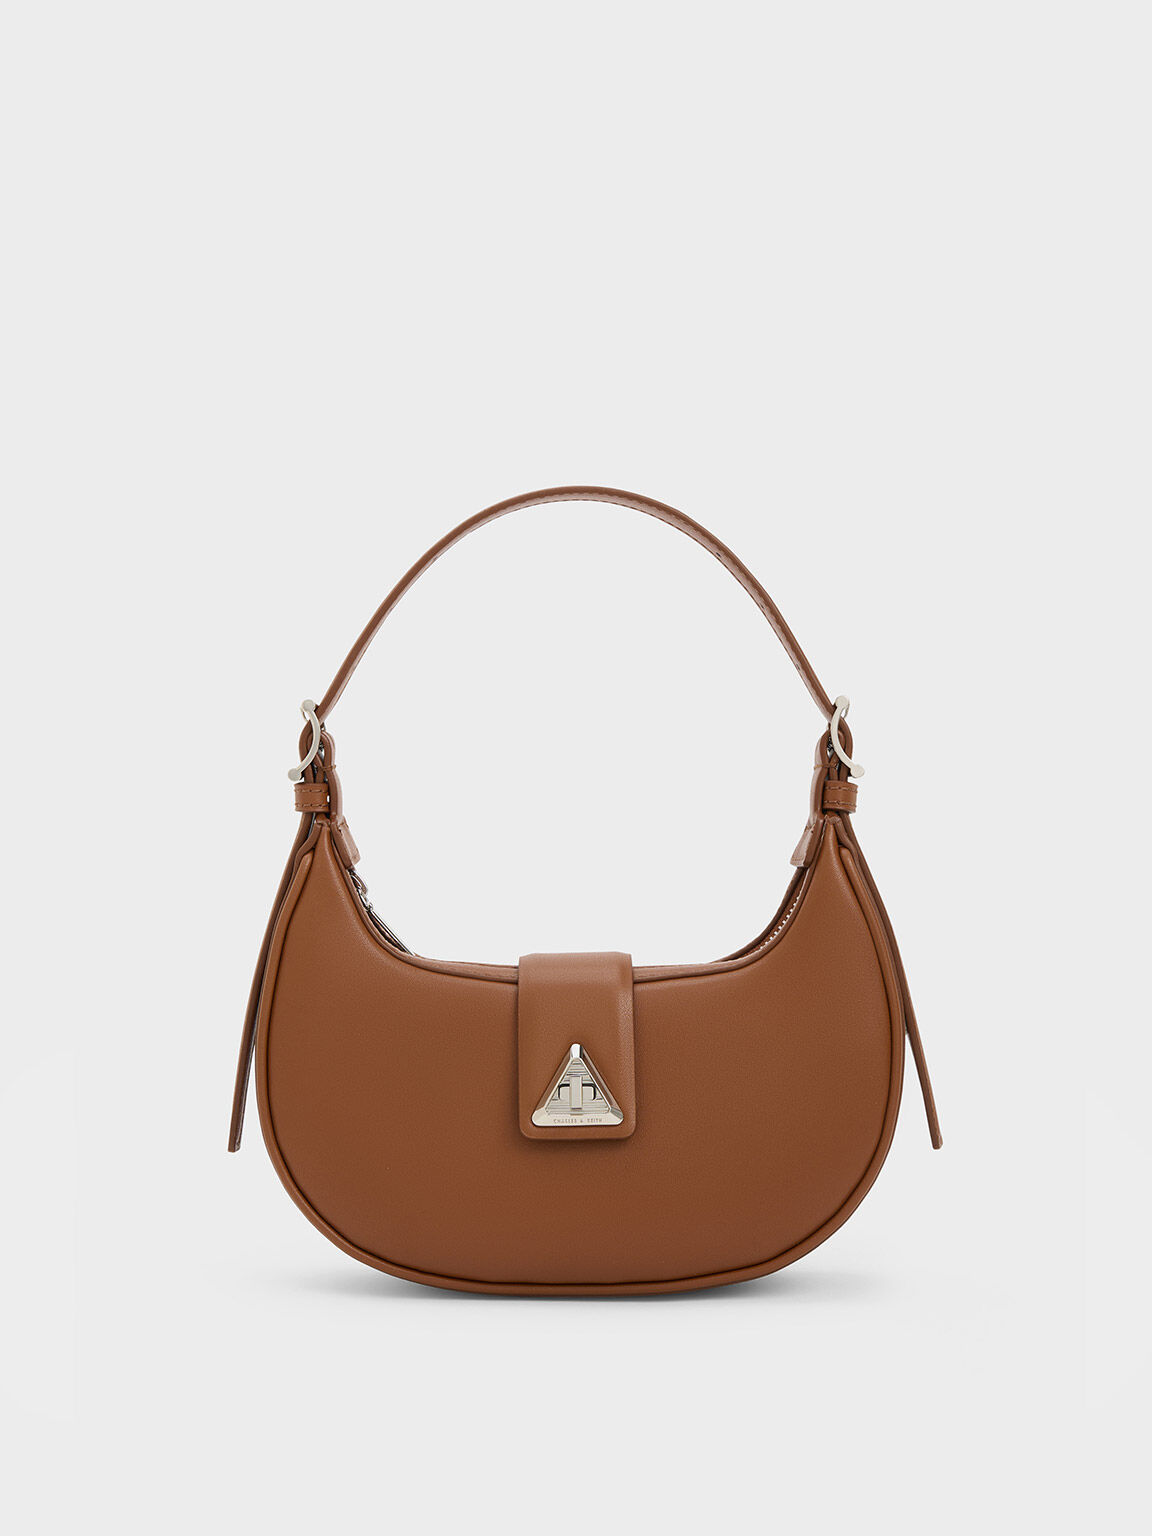 Help look for this cognac bucket bag with top turn lock as seen on